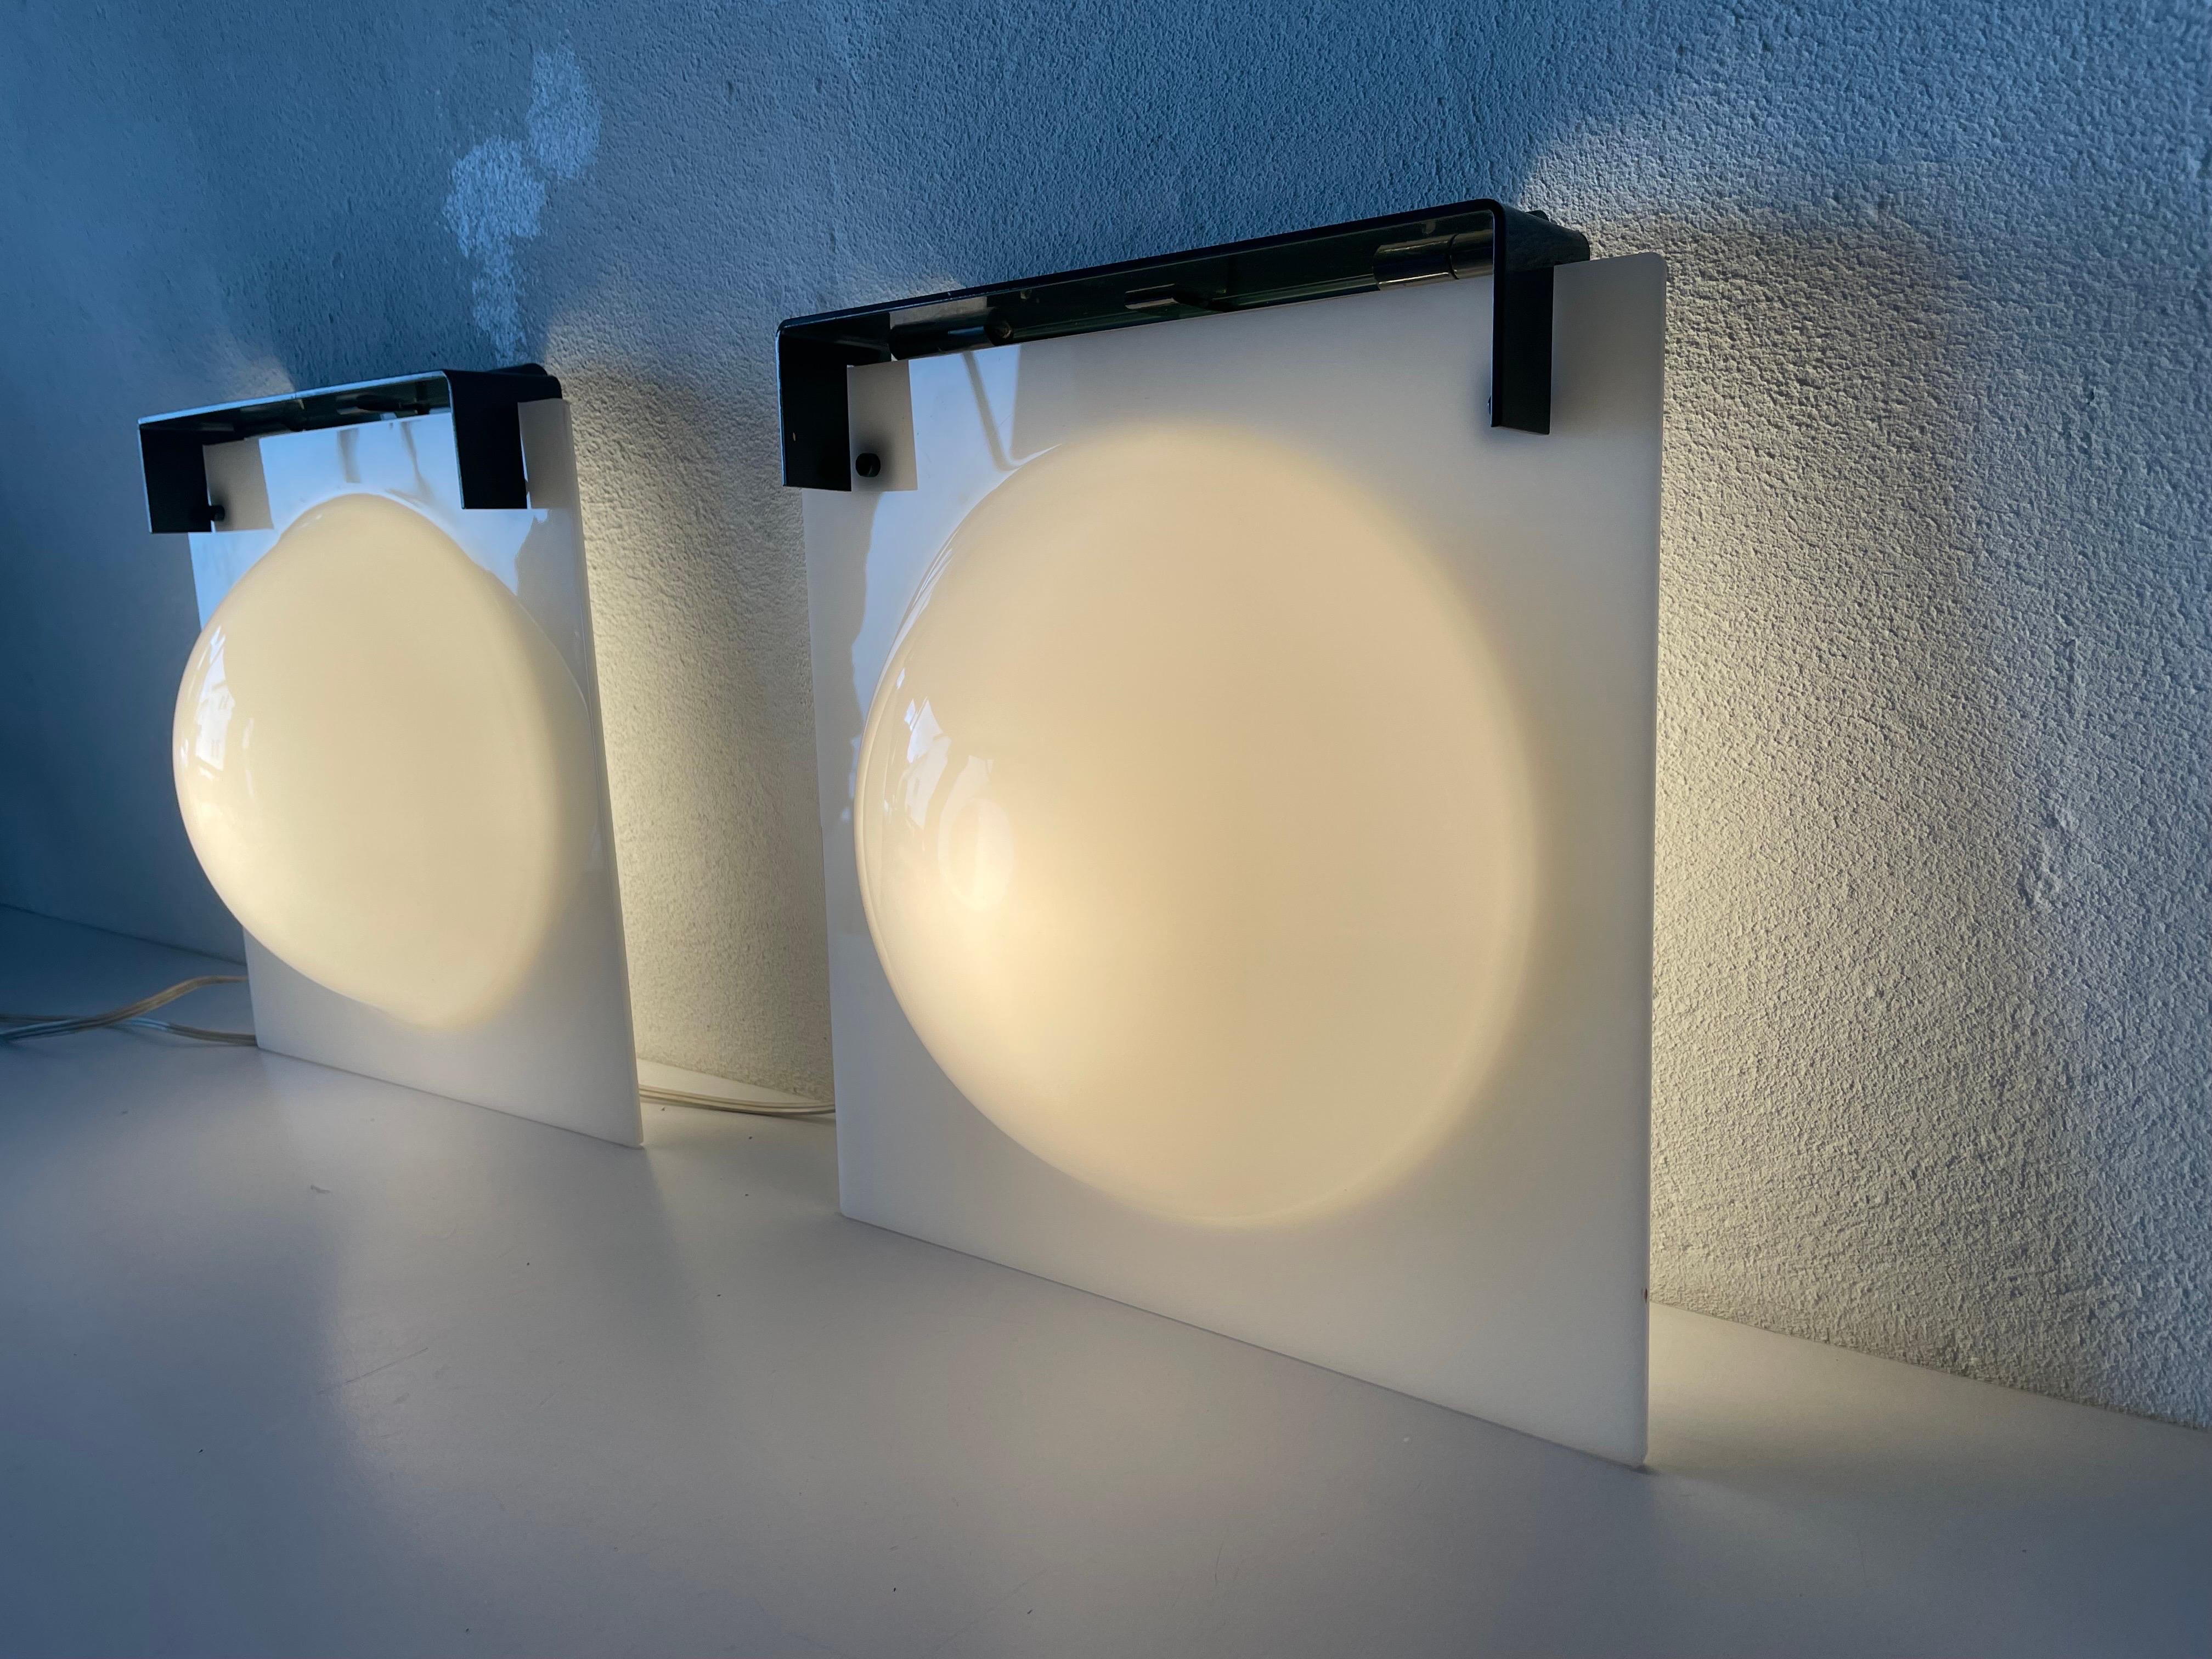 High Quality Plexiglass Bubble Design Pair of Wall Lamps, 1960s, Italy For Sale 8